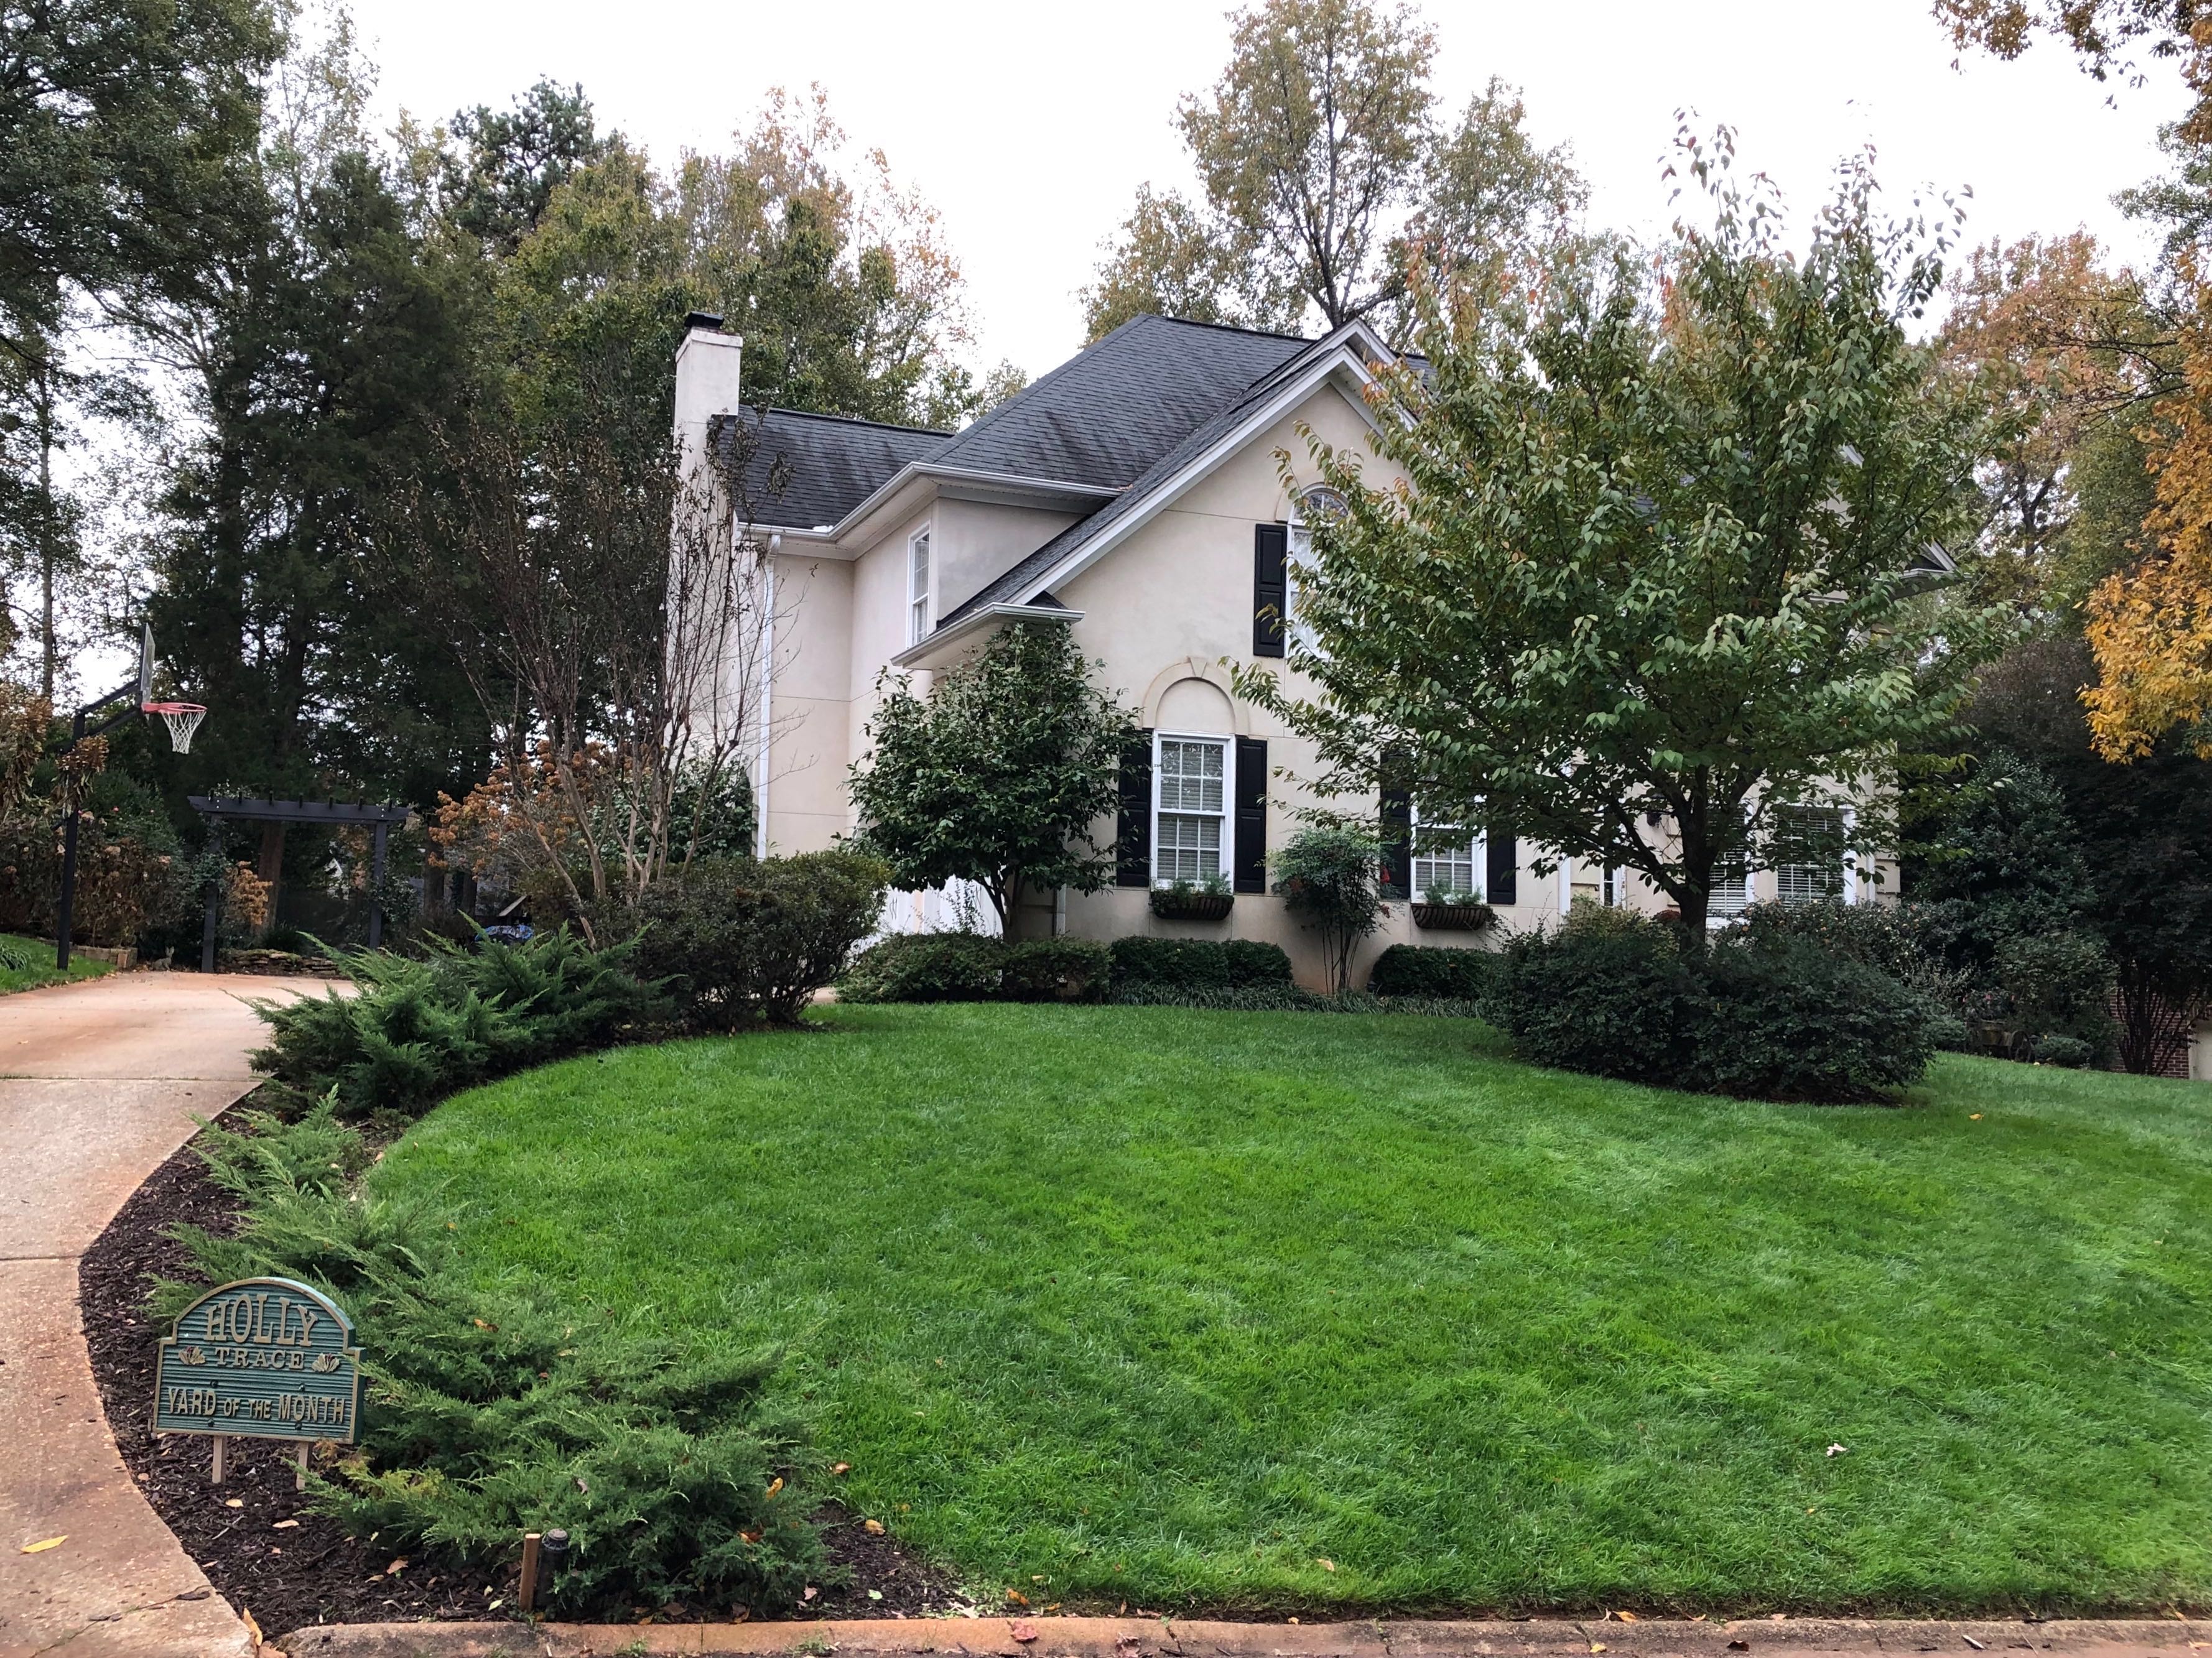 October 2019 Yard of the Month